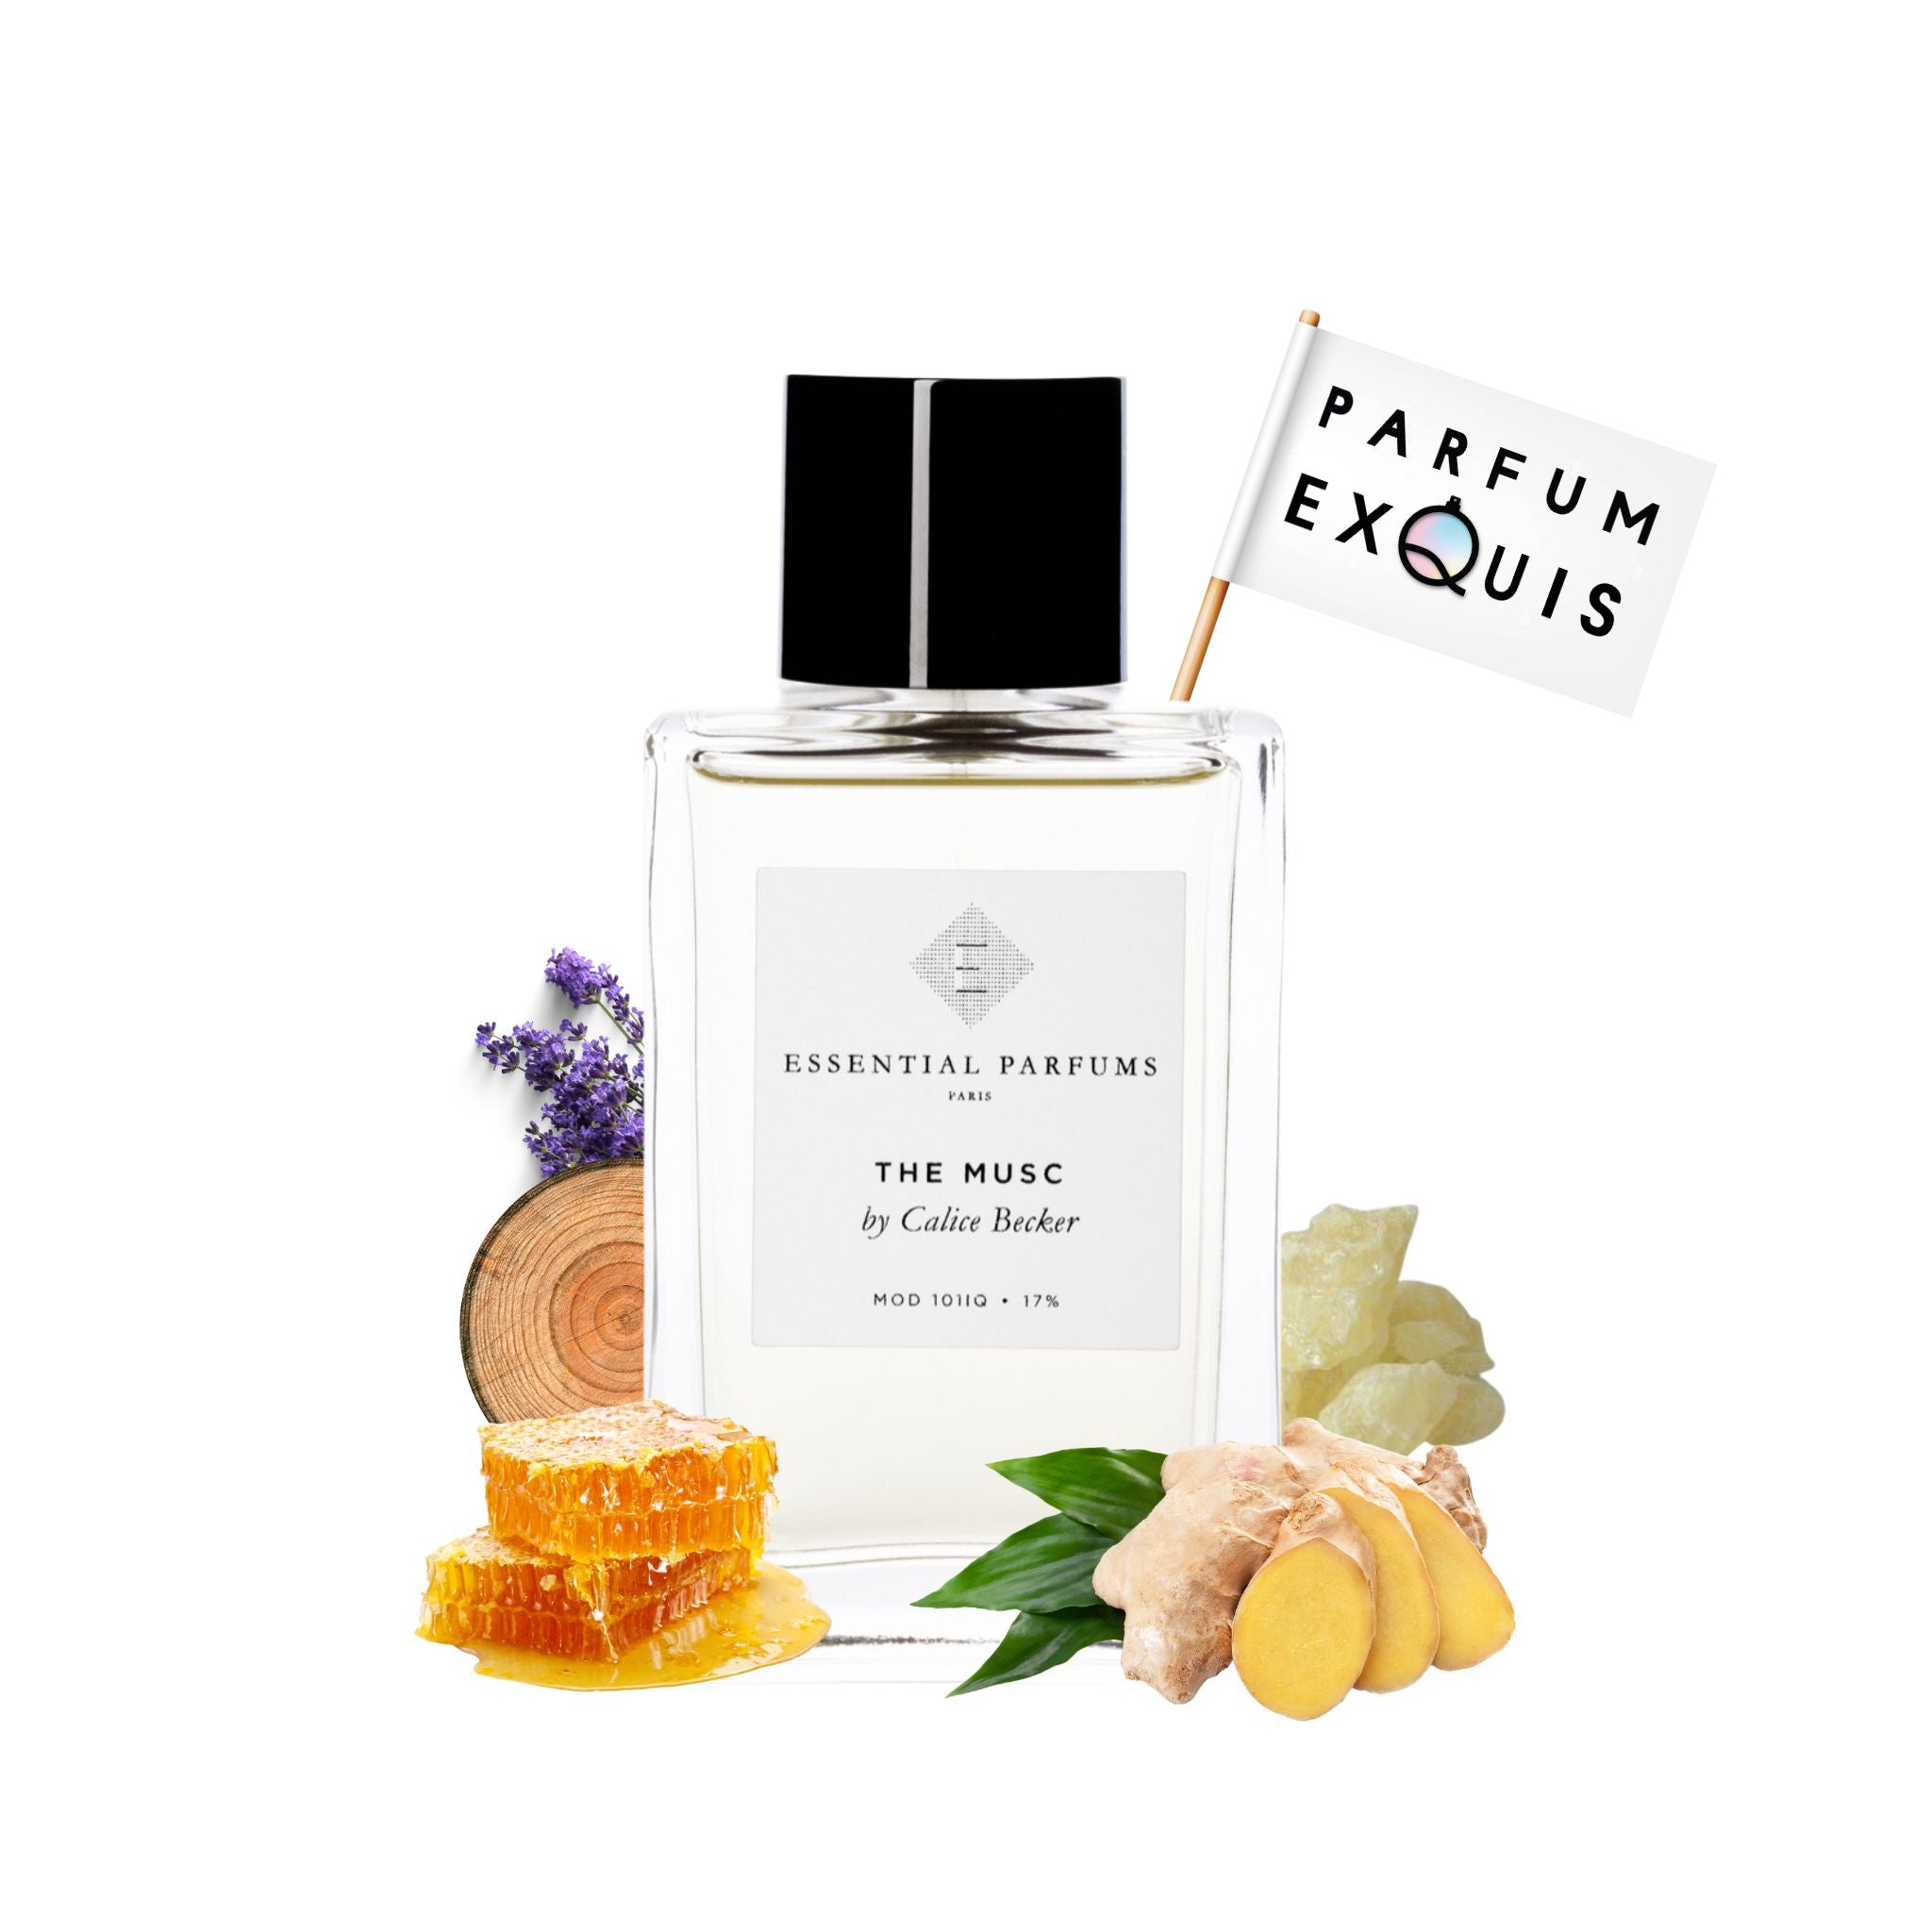 The Musc Essential Parfums Notes